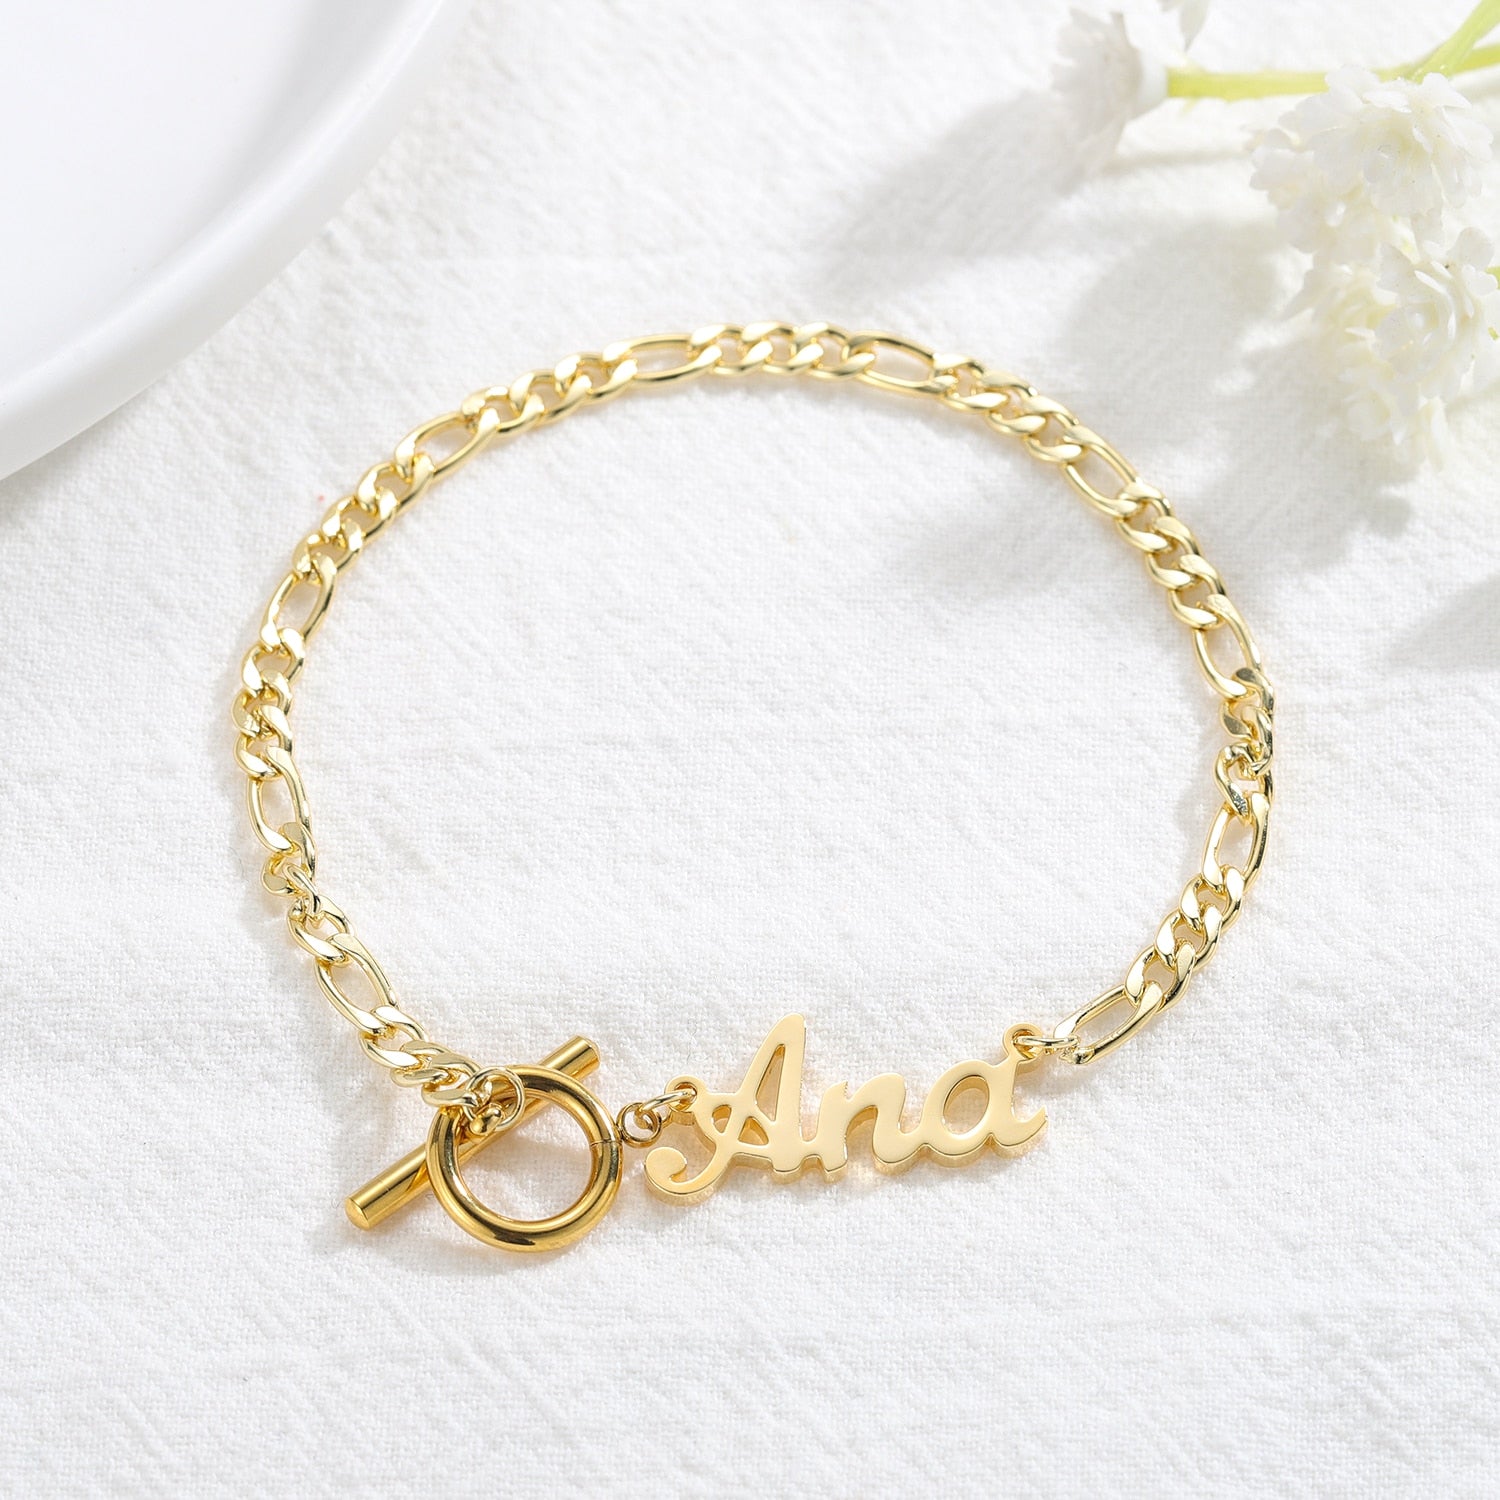 Personalised Name Gold T bar Bracelet with Toggle Clasp